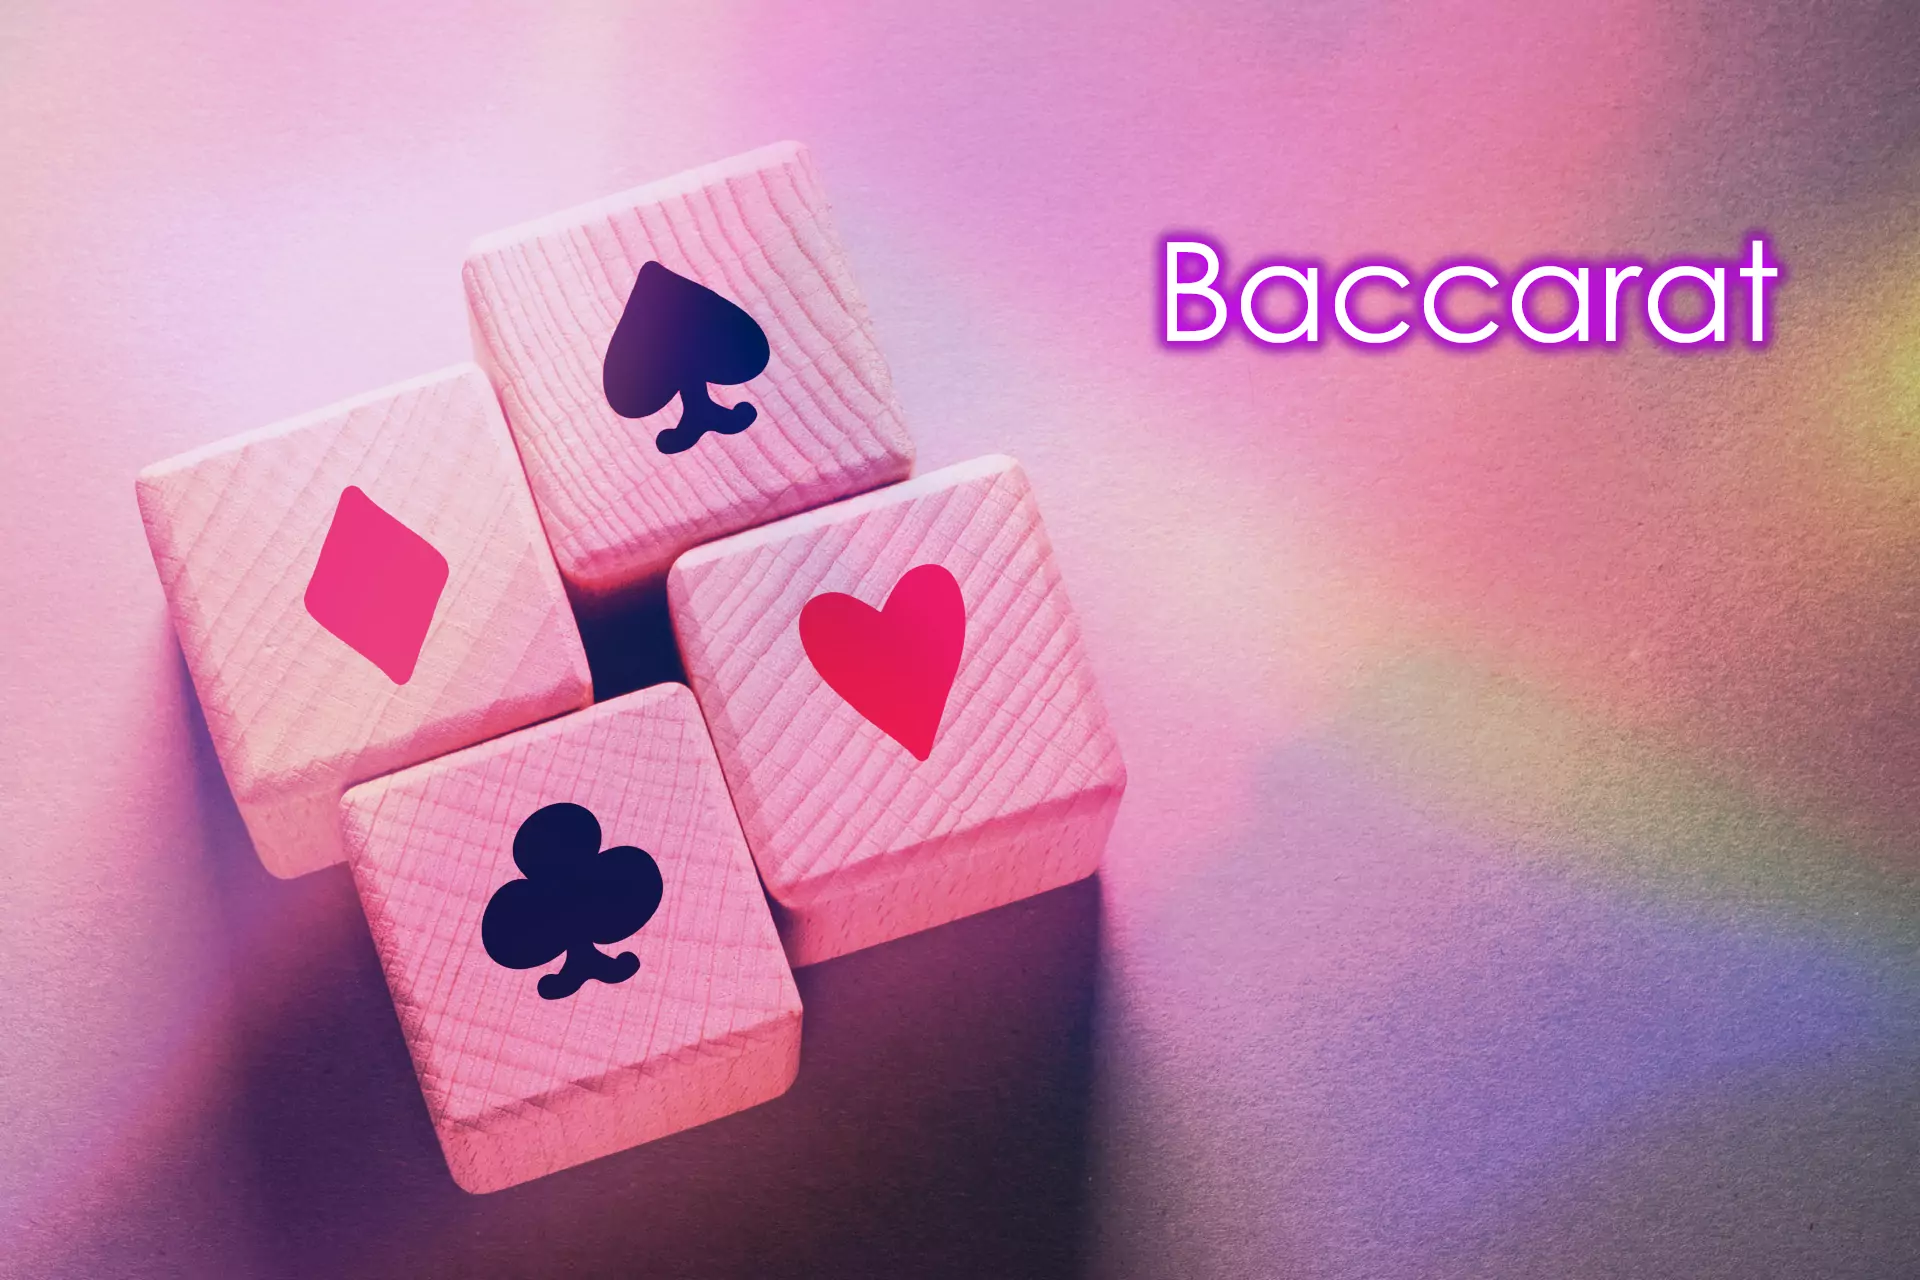 There are two players in baccarat: a banker and his opponent.